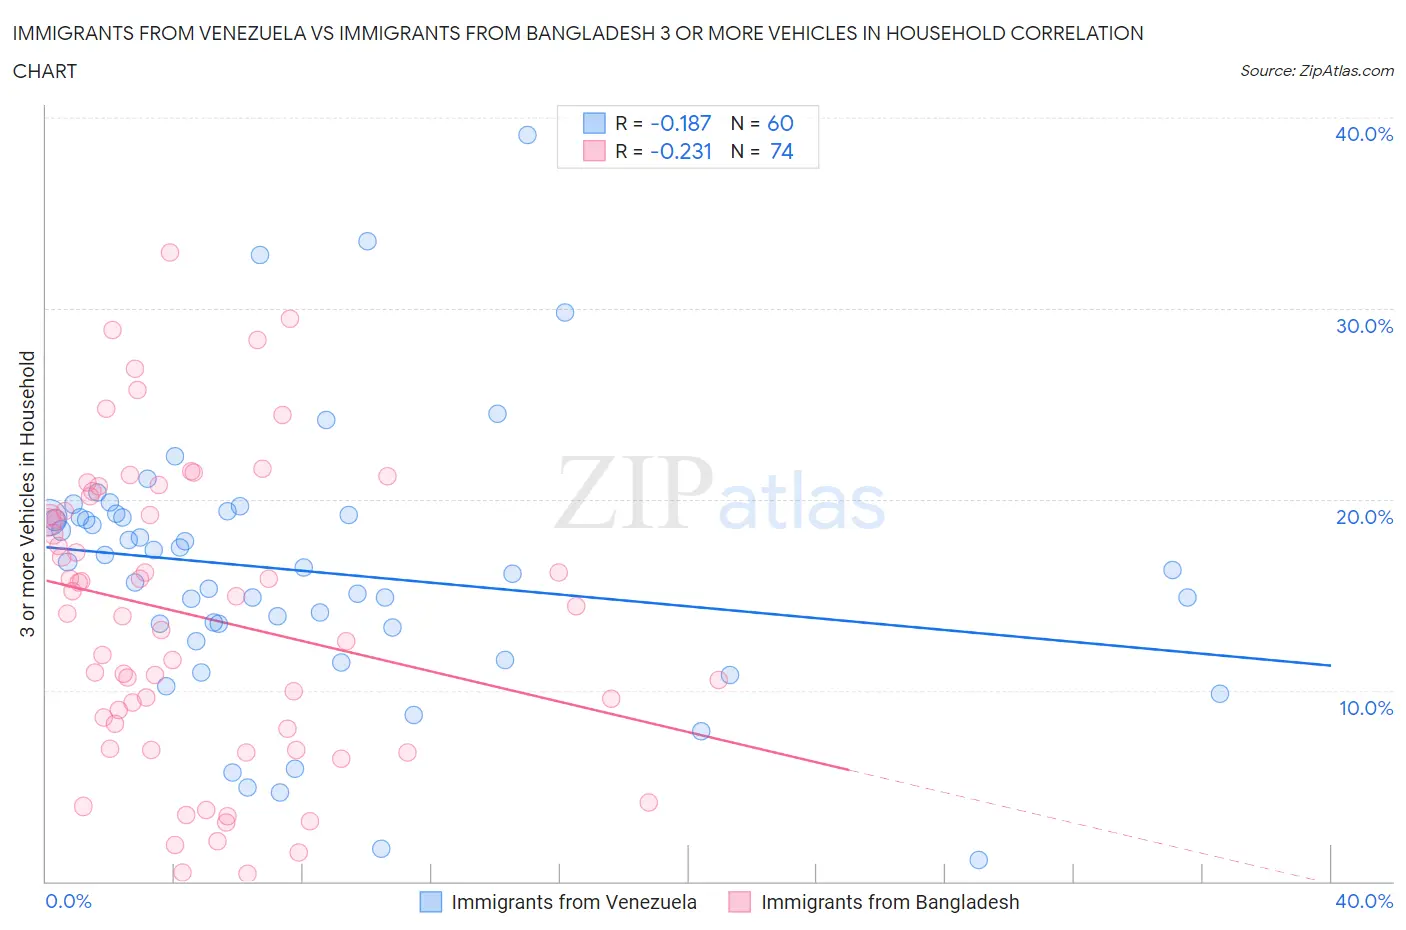 Immigrants from Venezuela vs Immigrants from Bangladesh 3 or more Vehicles in Household